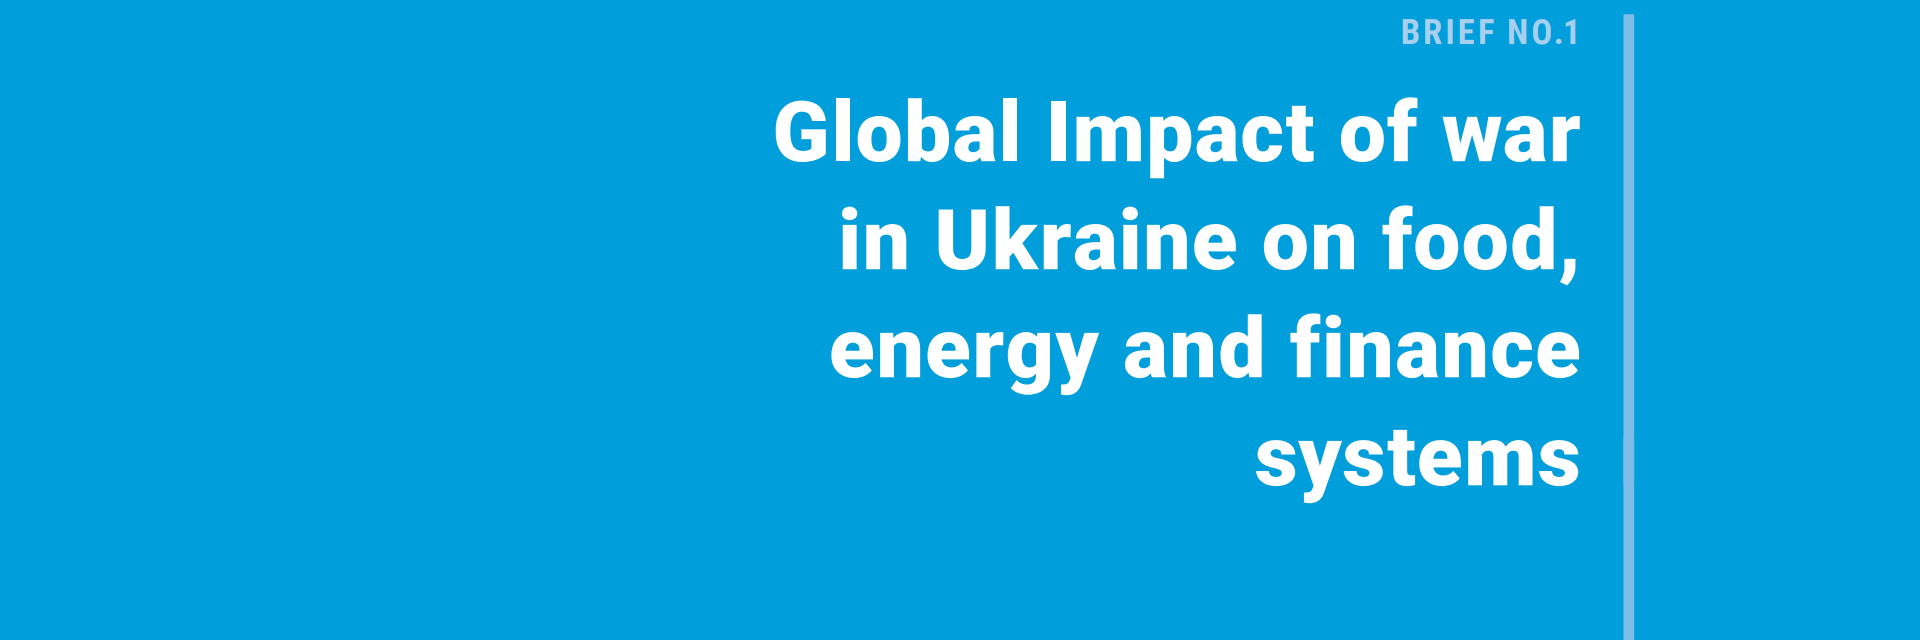 Global Impact of war in Ukraine on food, energy and finance systems